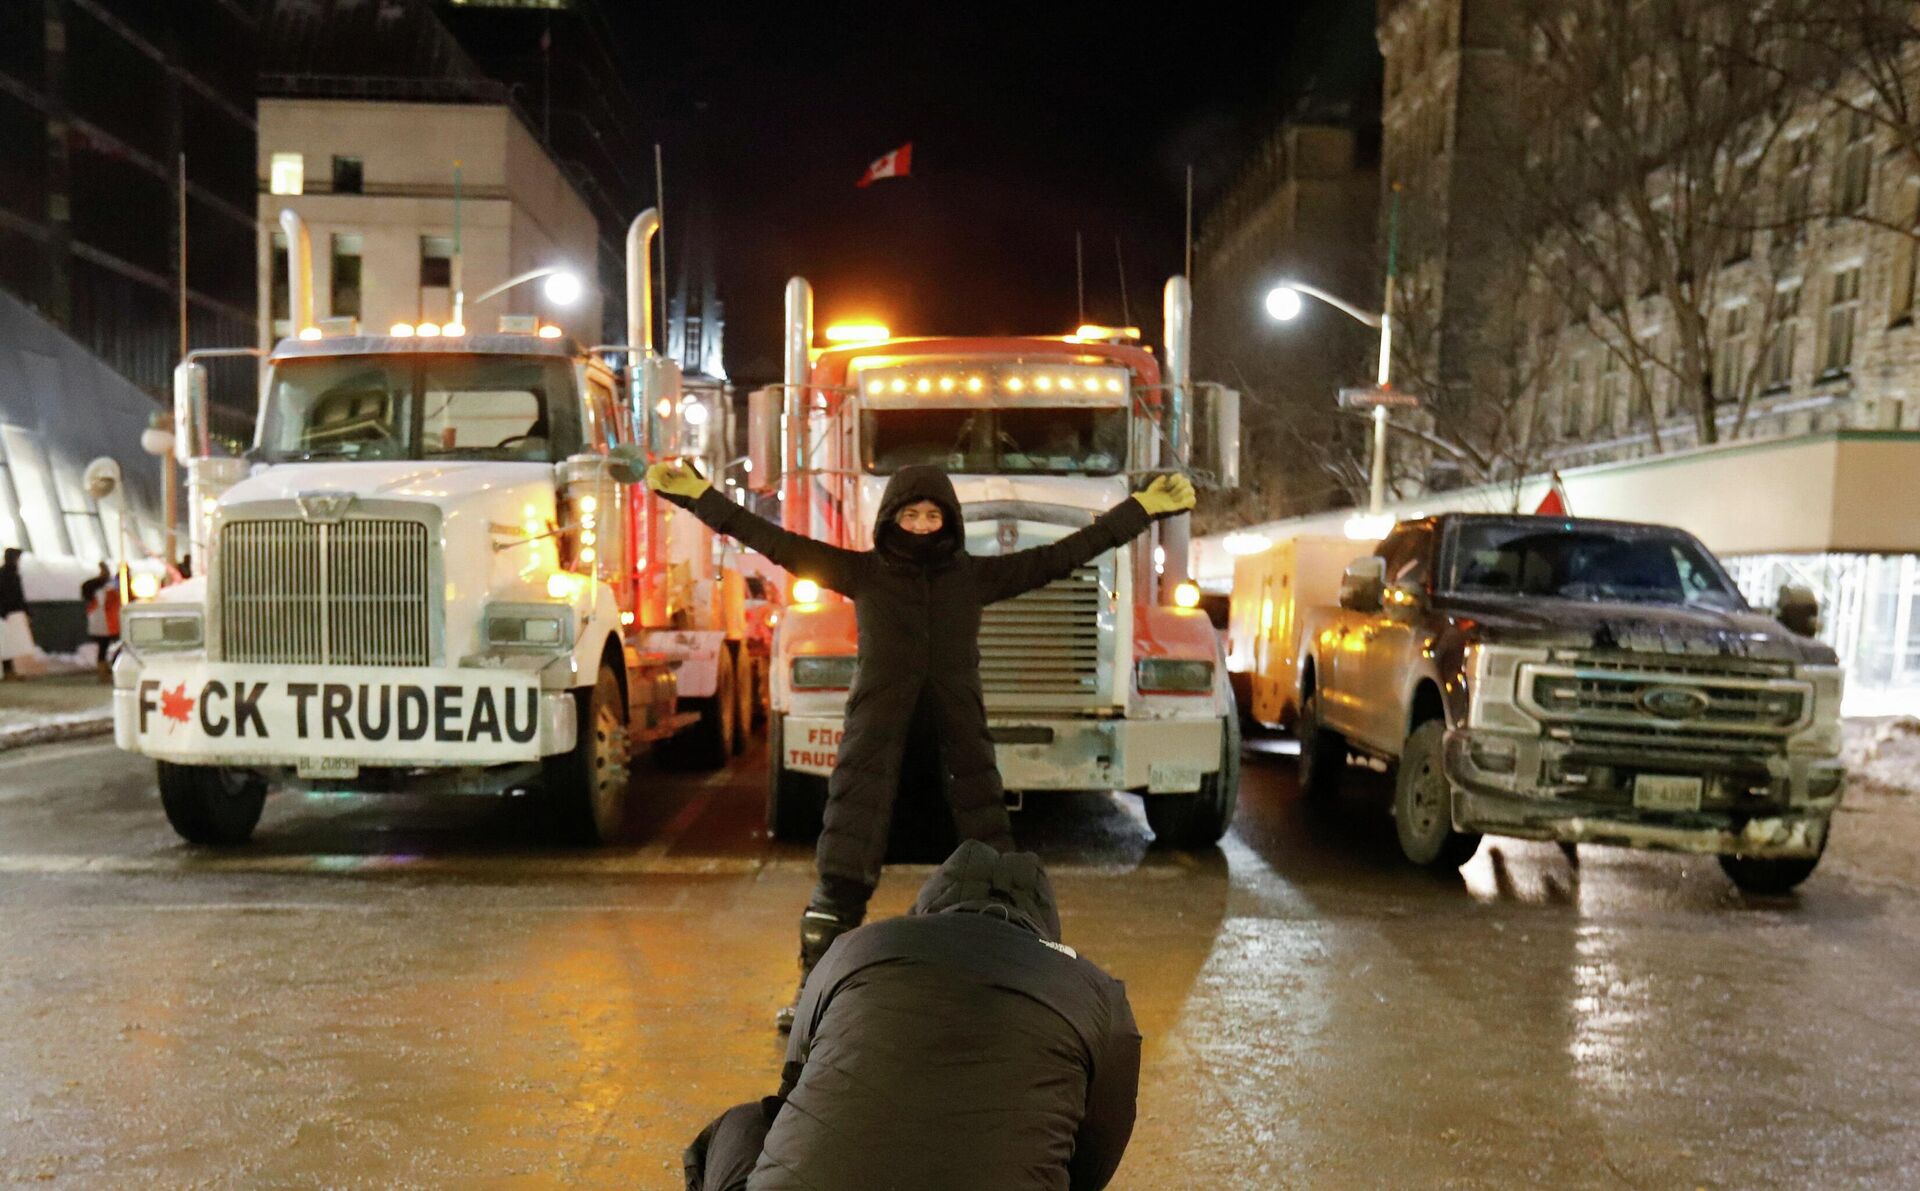 A woman poses for a photo in front of trucks that are part of a trucker convoy to protest coronavirus disease (COVID-19) vaccine mandates for cross-border truck drivers on Parliament Hill in Ottawa, Ontario, Canada, January 28, 2022 - Sputnik International, 1920, 14.02.2022